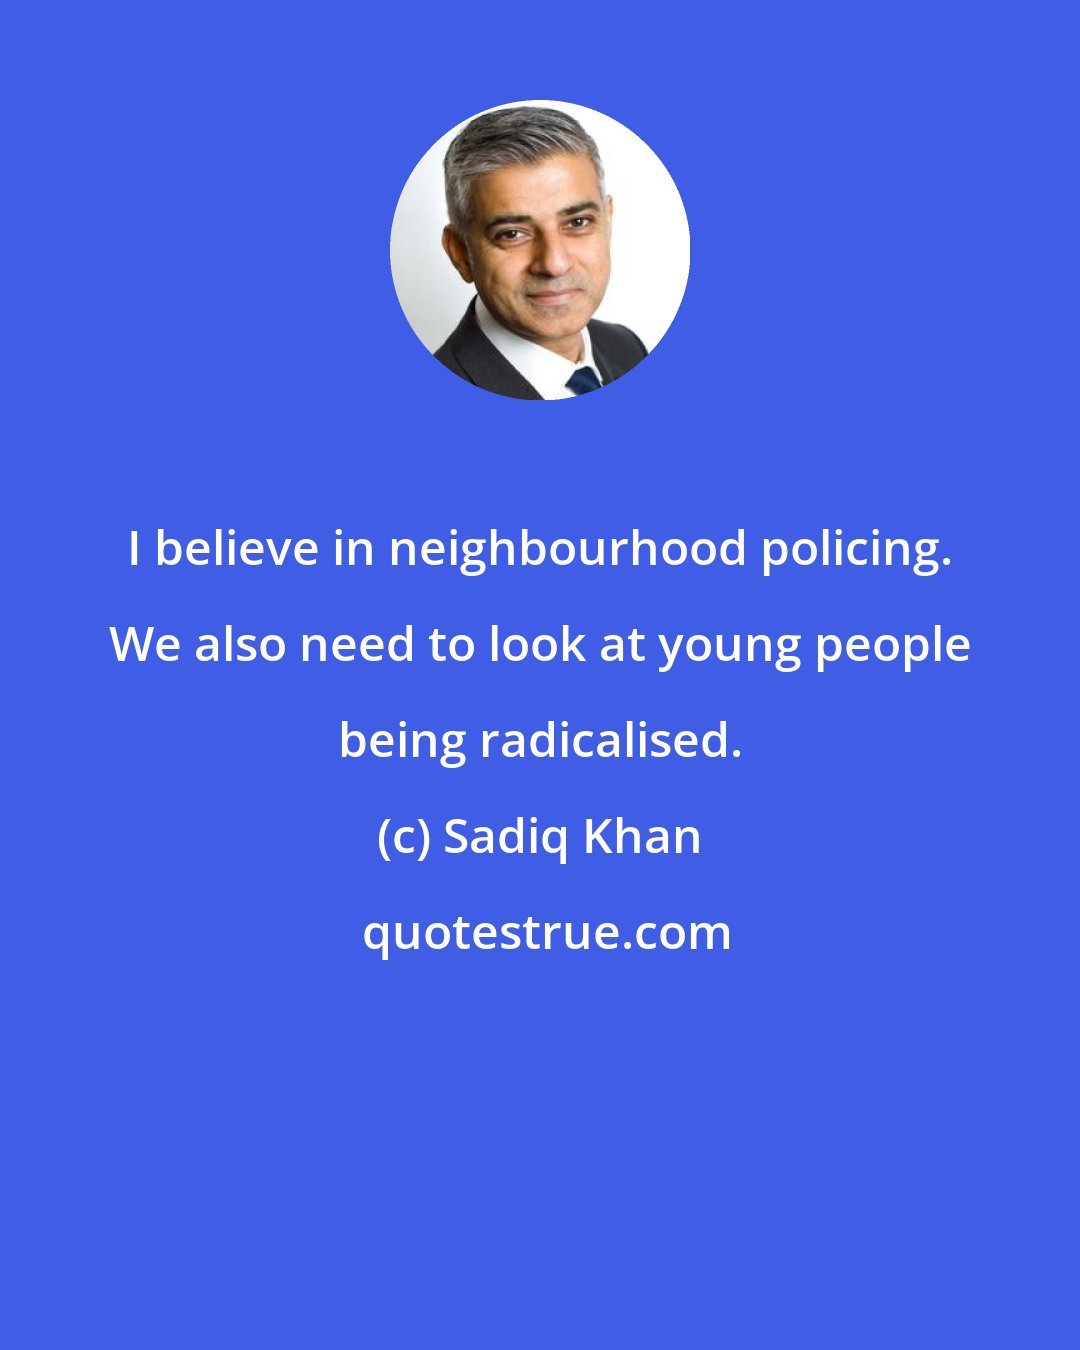 Sadiq Khan: I believe in neighbourhood policing. We also need to look at young people being radicalised.